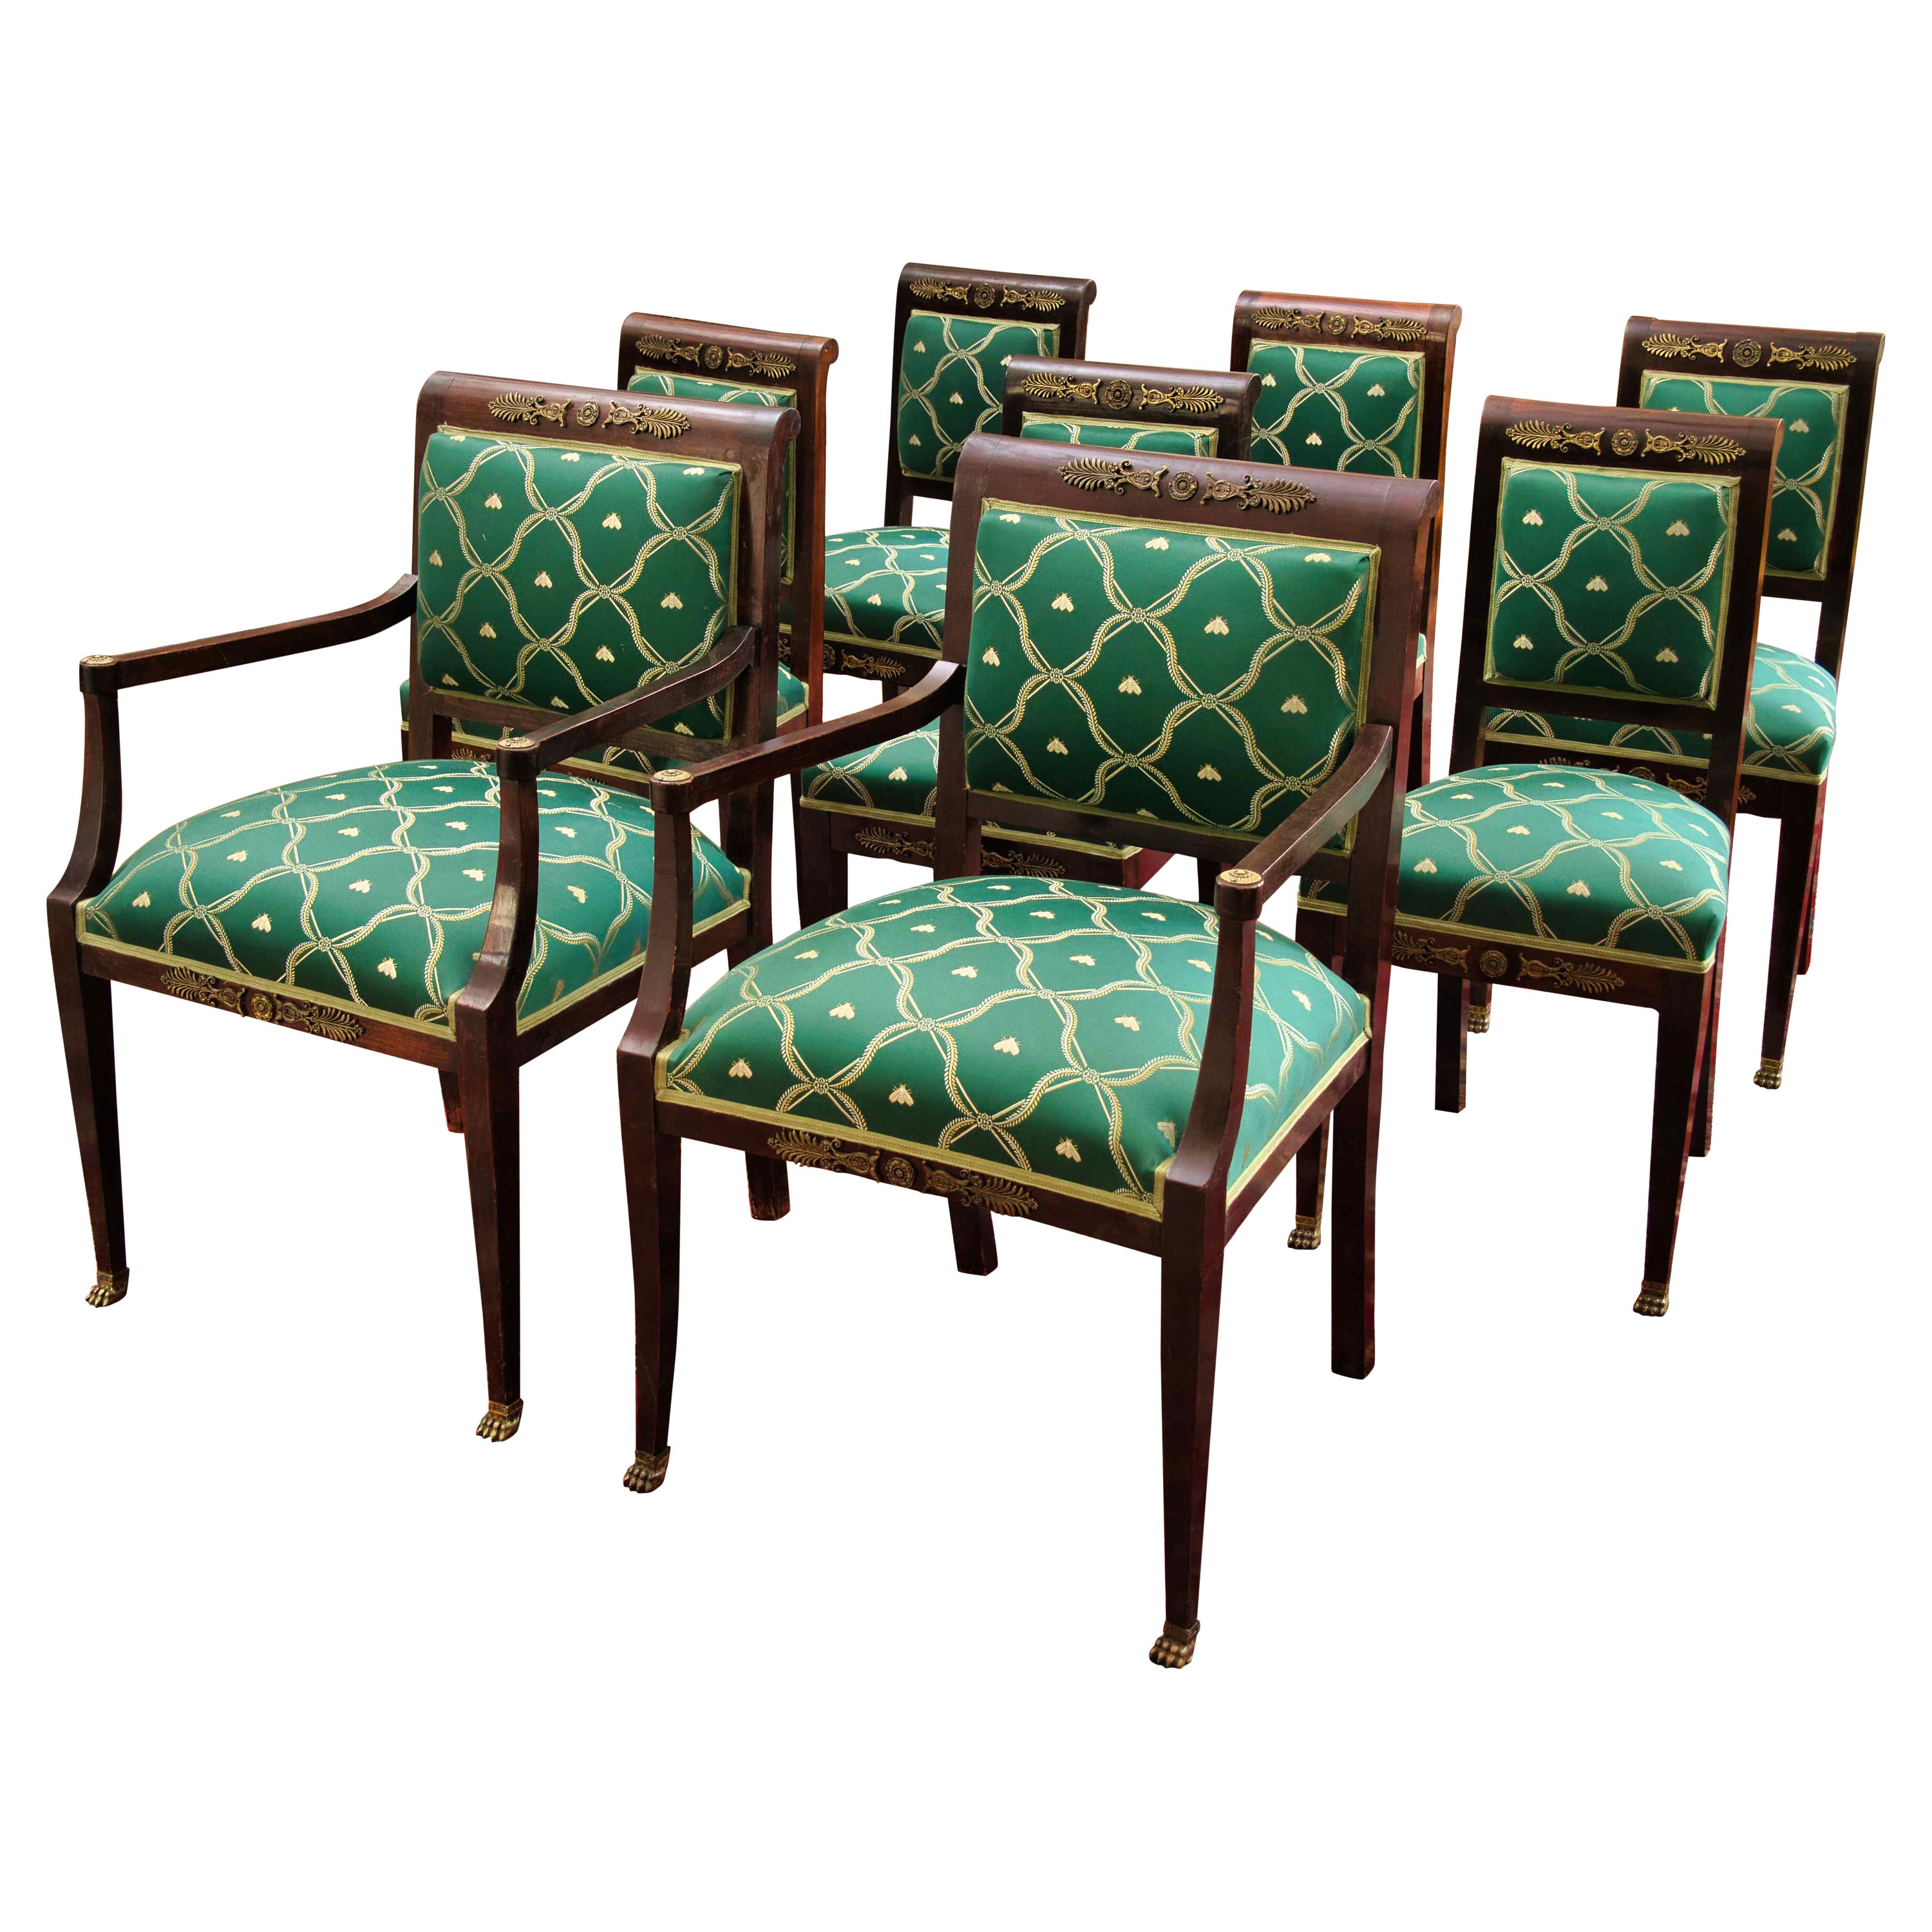 Restored set of 6 chairs and 2 armchairs - Empire